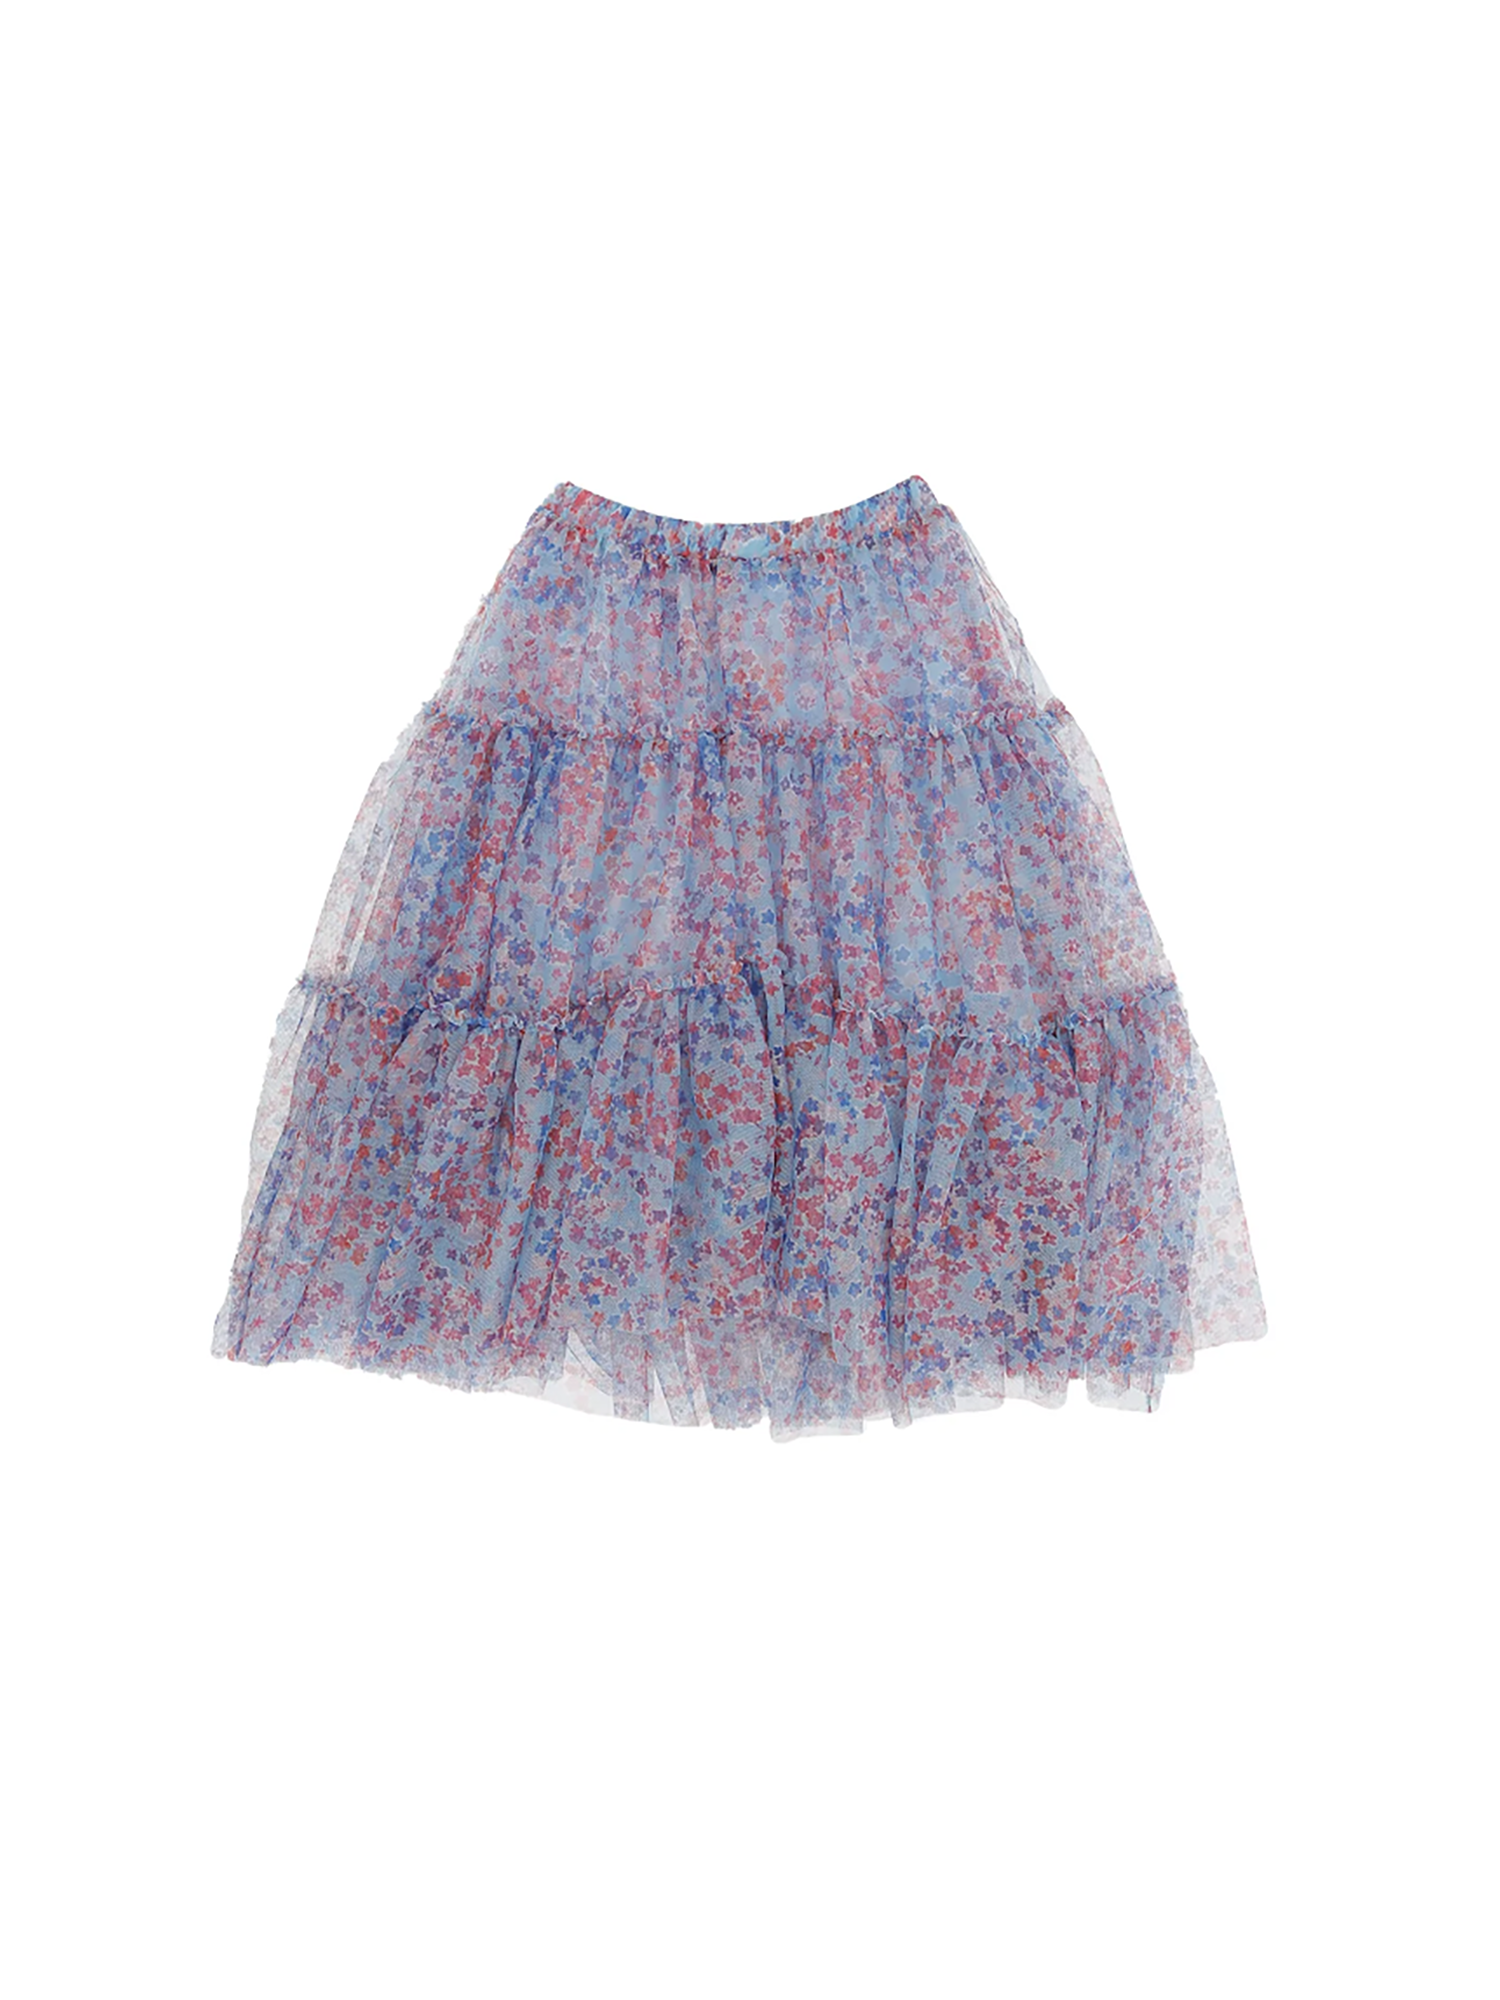 Philosophy Ruffled Skirt With All over Print Detail